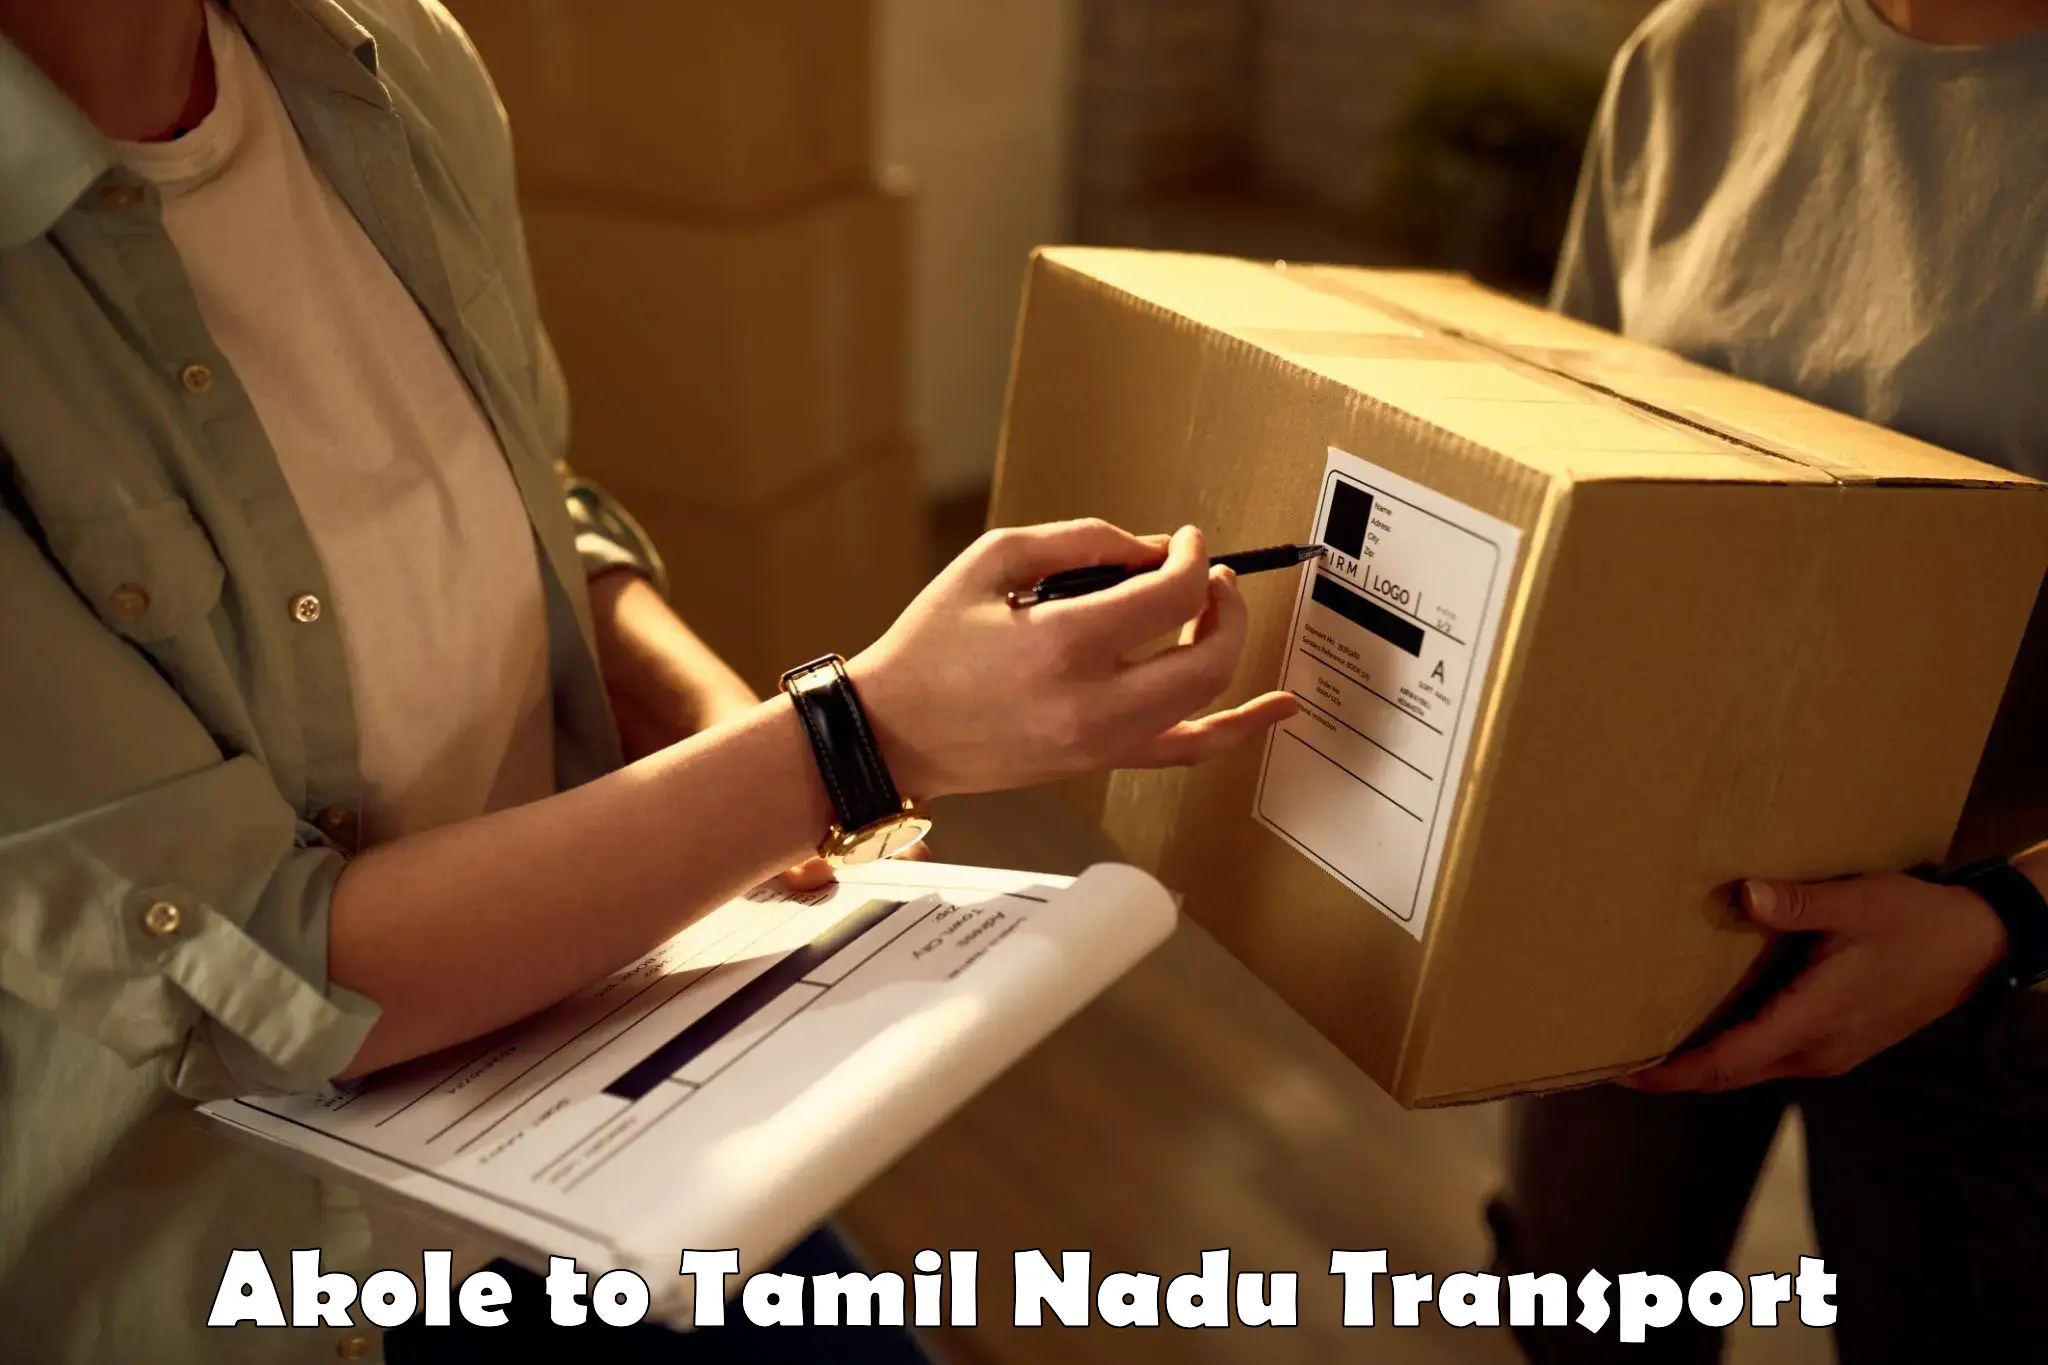 Material transport services Akole to Aranthangi